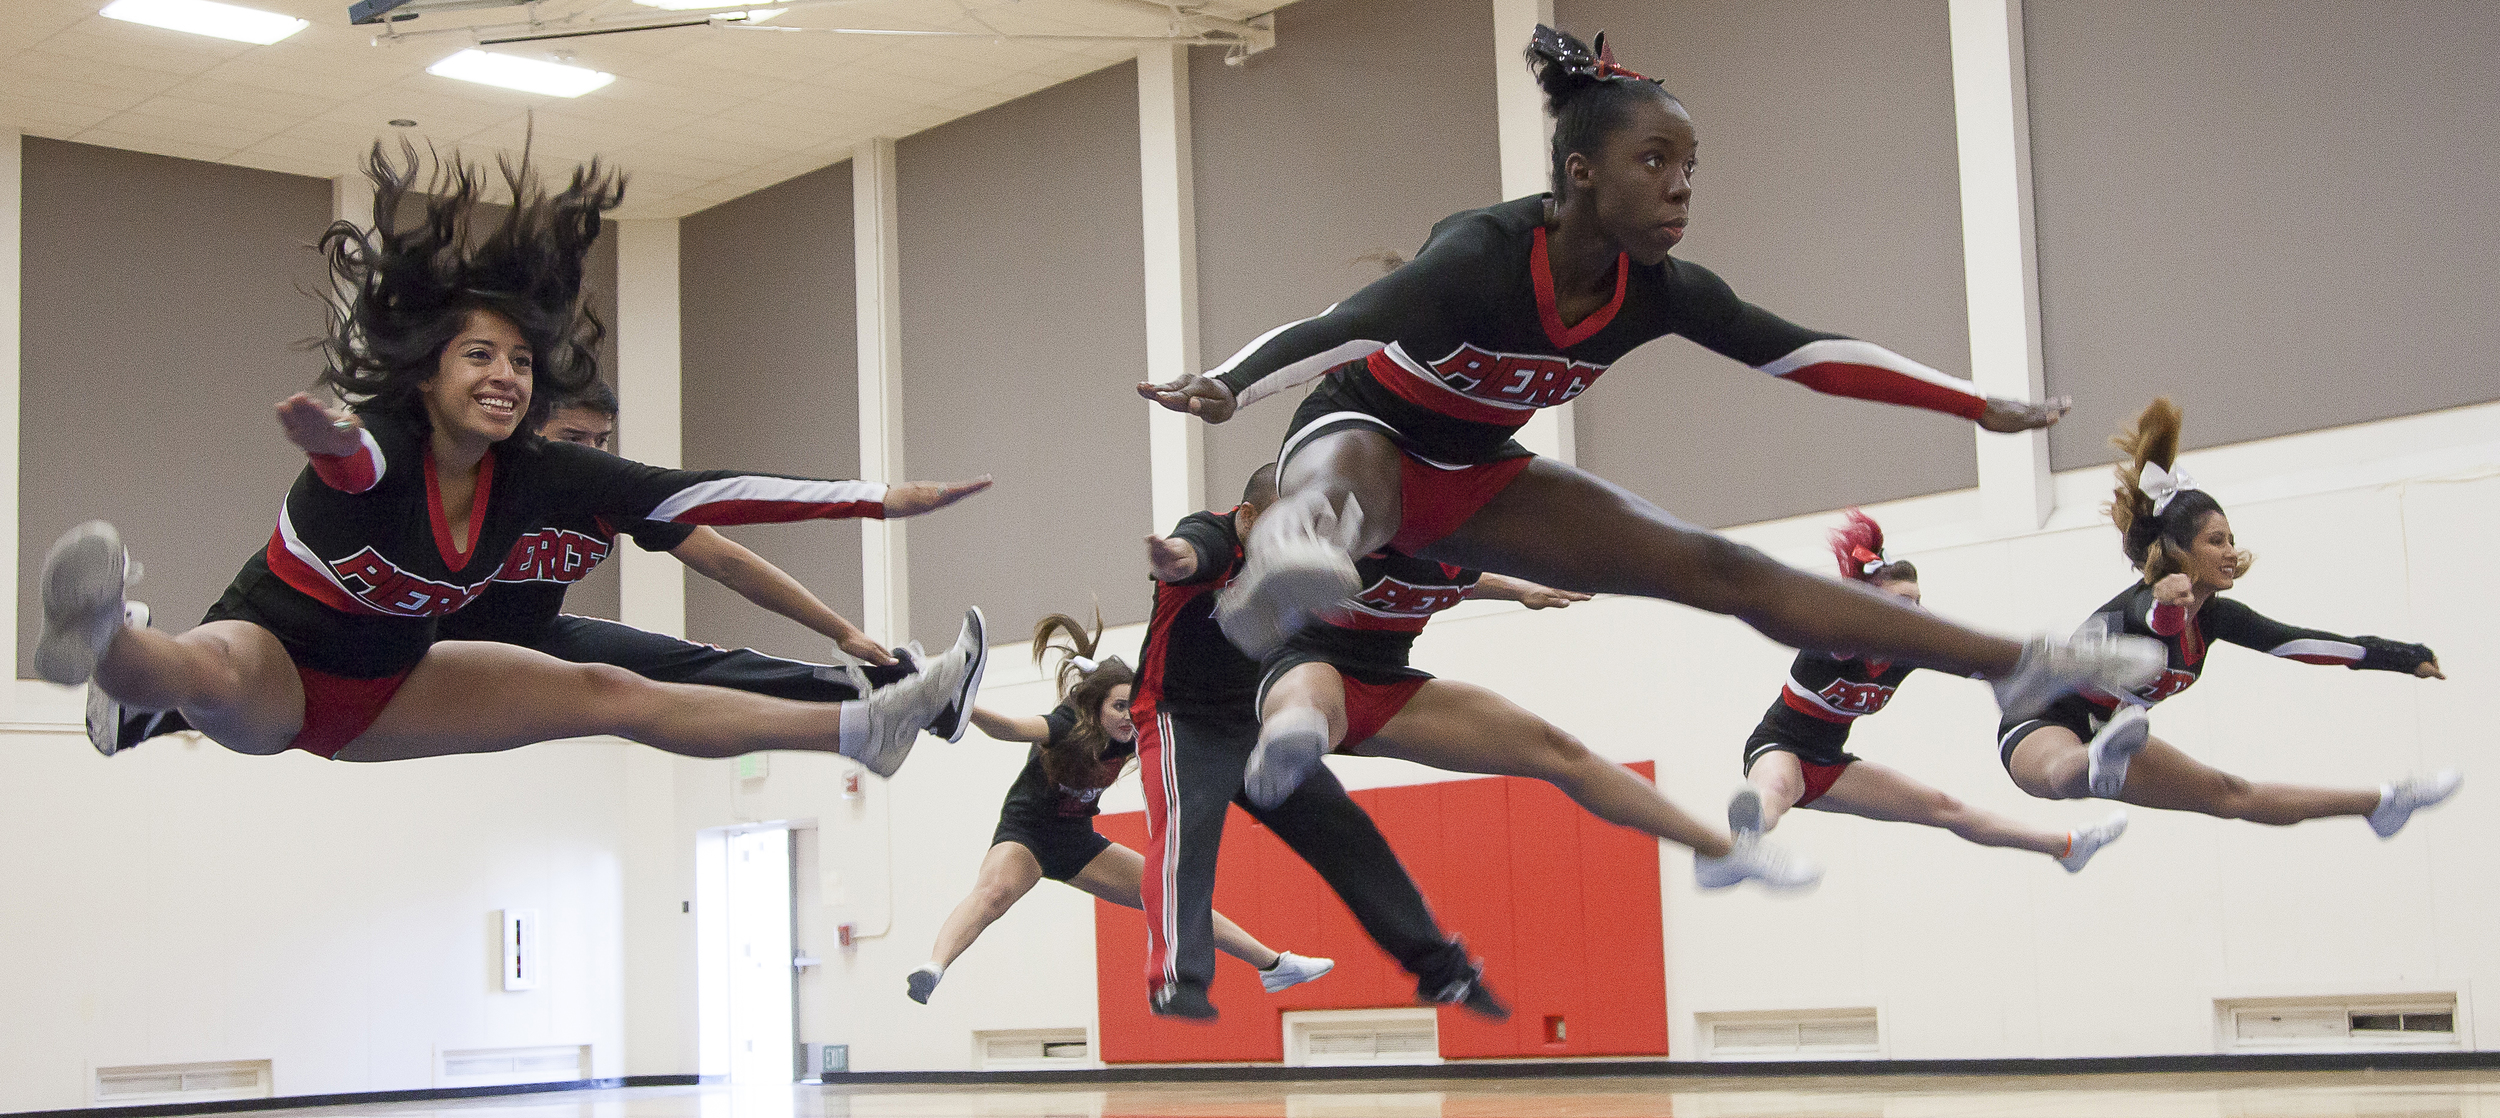  (From left-right) Dulce Rendon, Rushanda Duquesnay, Daisy Torres Barrera and other members of the Pierce Cheer Competition Team jump during a practice session in the North Gym on Sunday March 1, 2015. The jump is a part of the routine that will be u